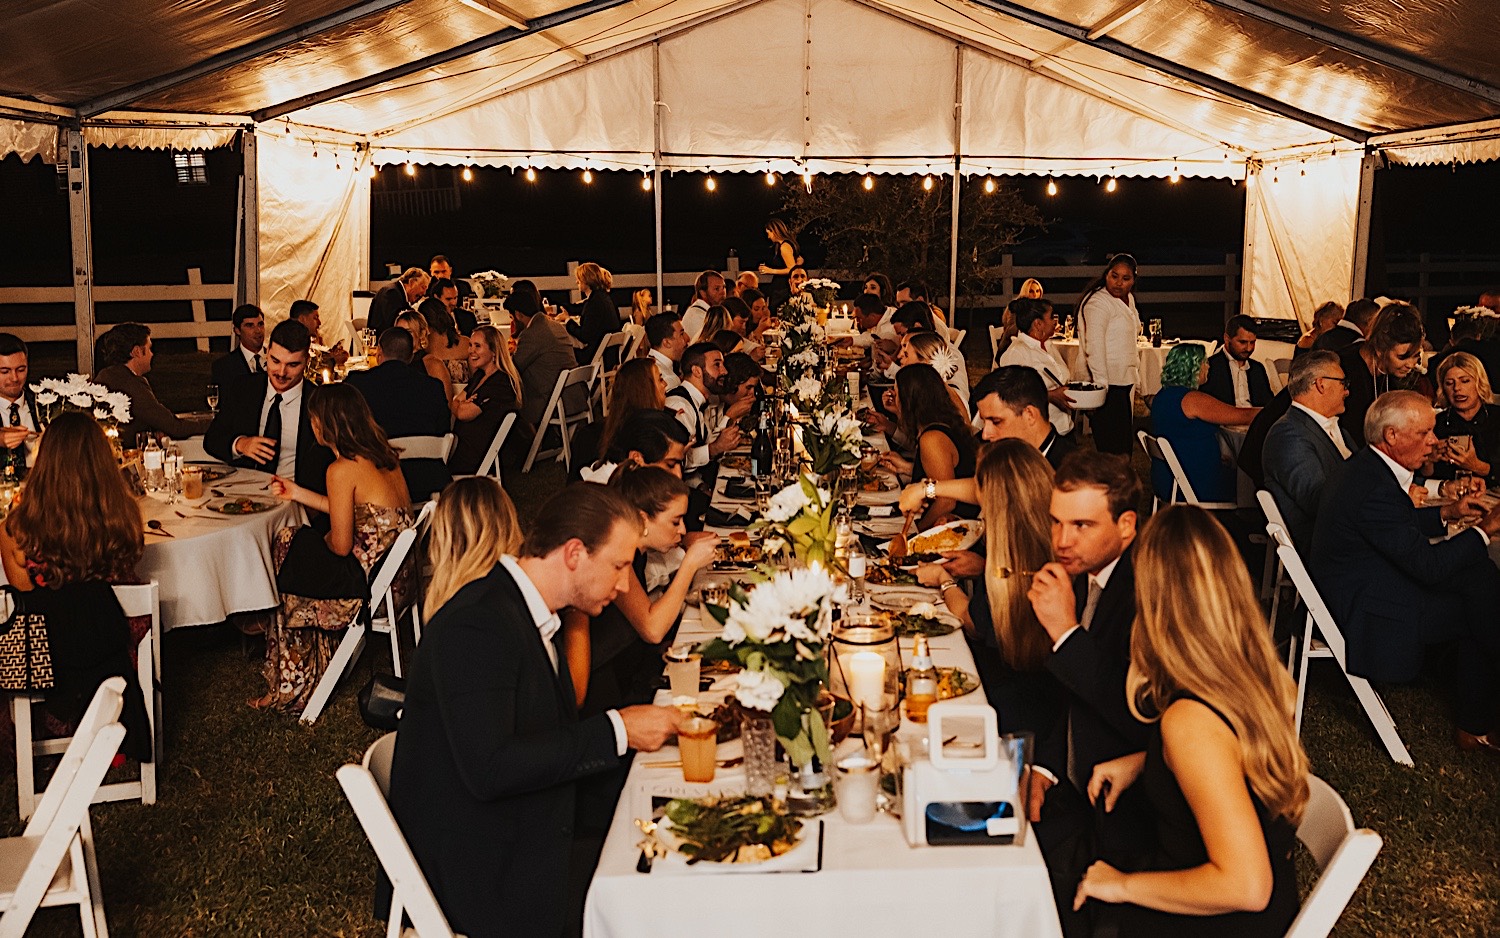 A wedding reception takes place underneath a large string lit tent